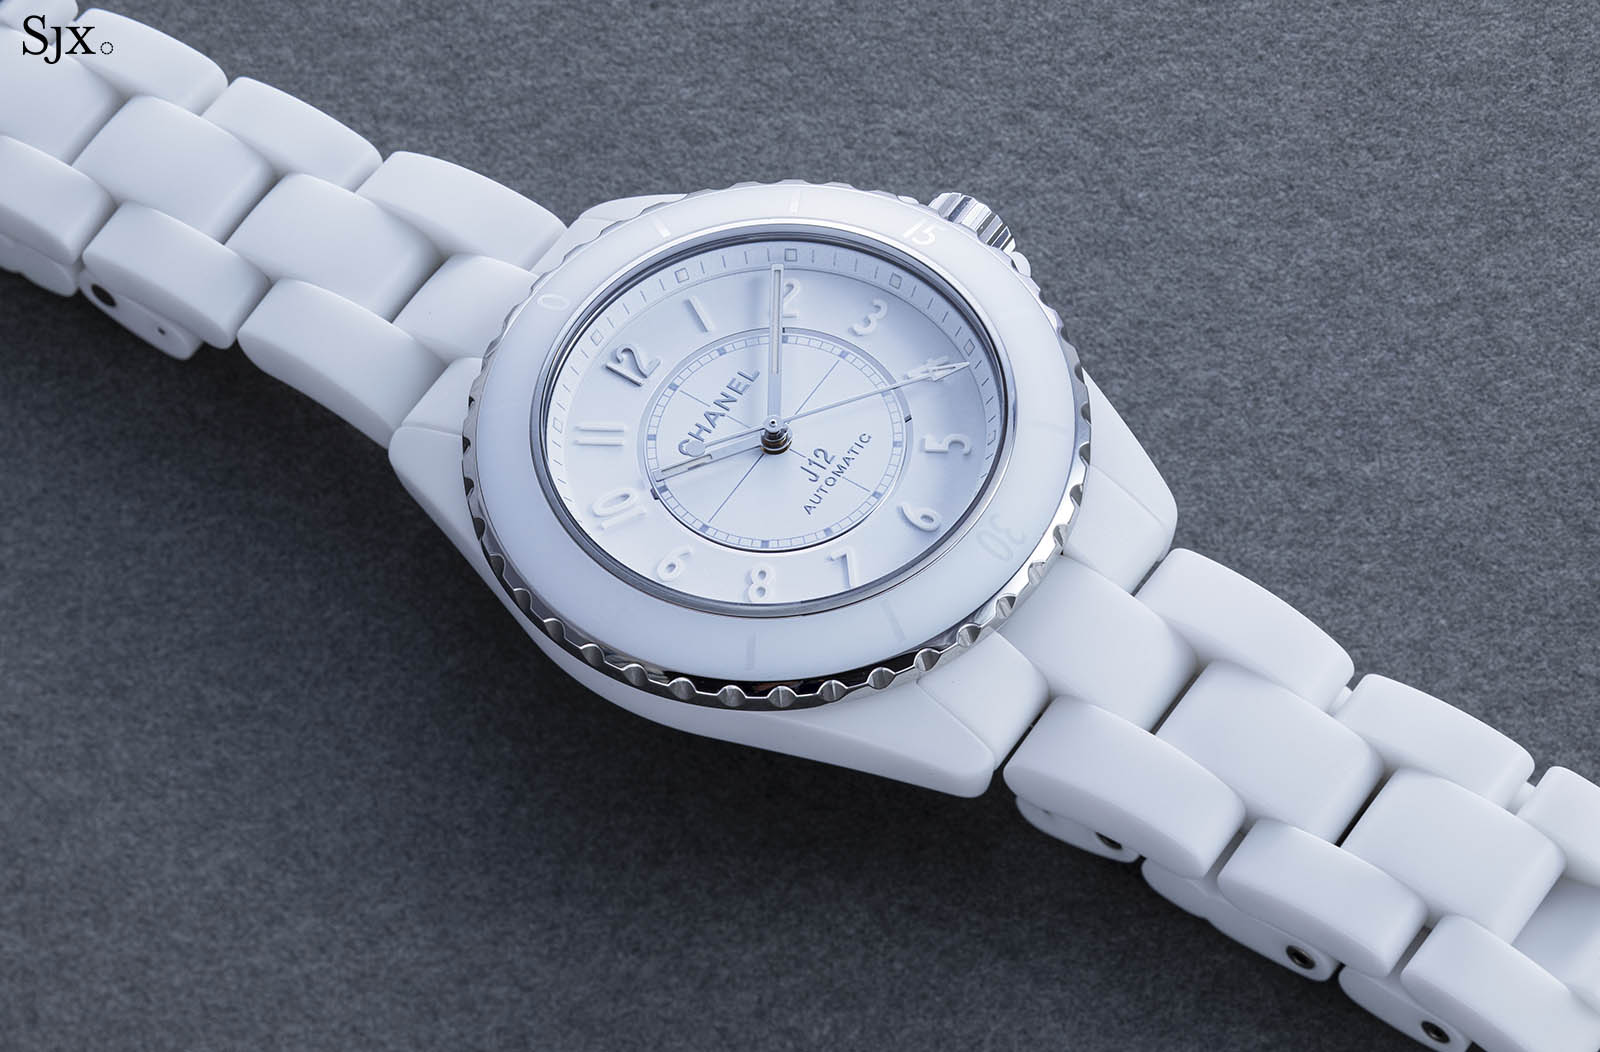 Chanel J12 Watch  H2569  6400 USD  The Watch Pages